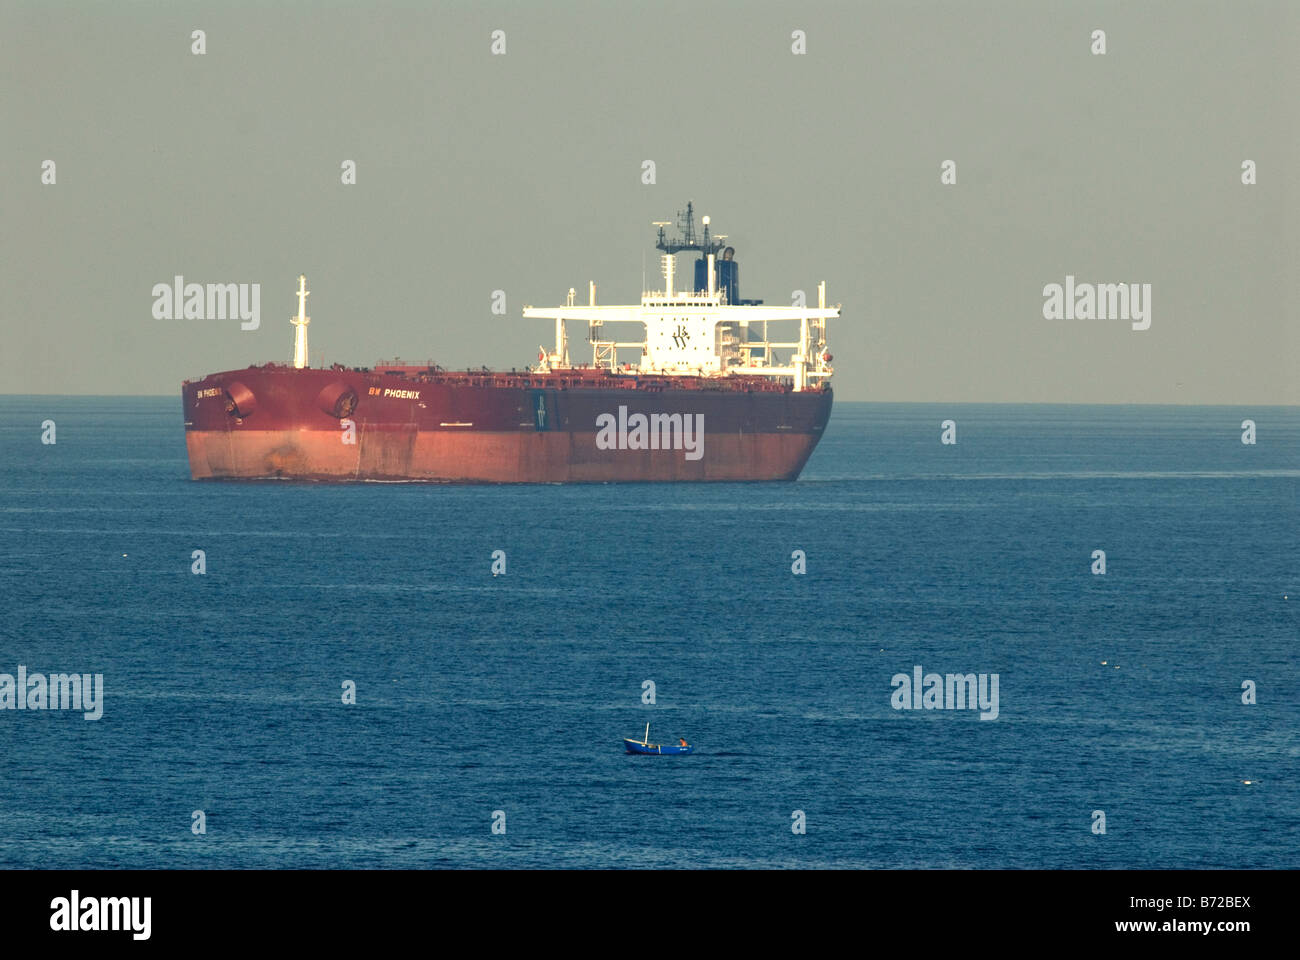 Super tanker anchored in Mediterranean with small open fishing boat in foreground Stock Photo